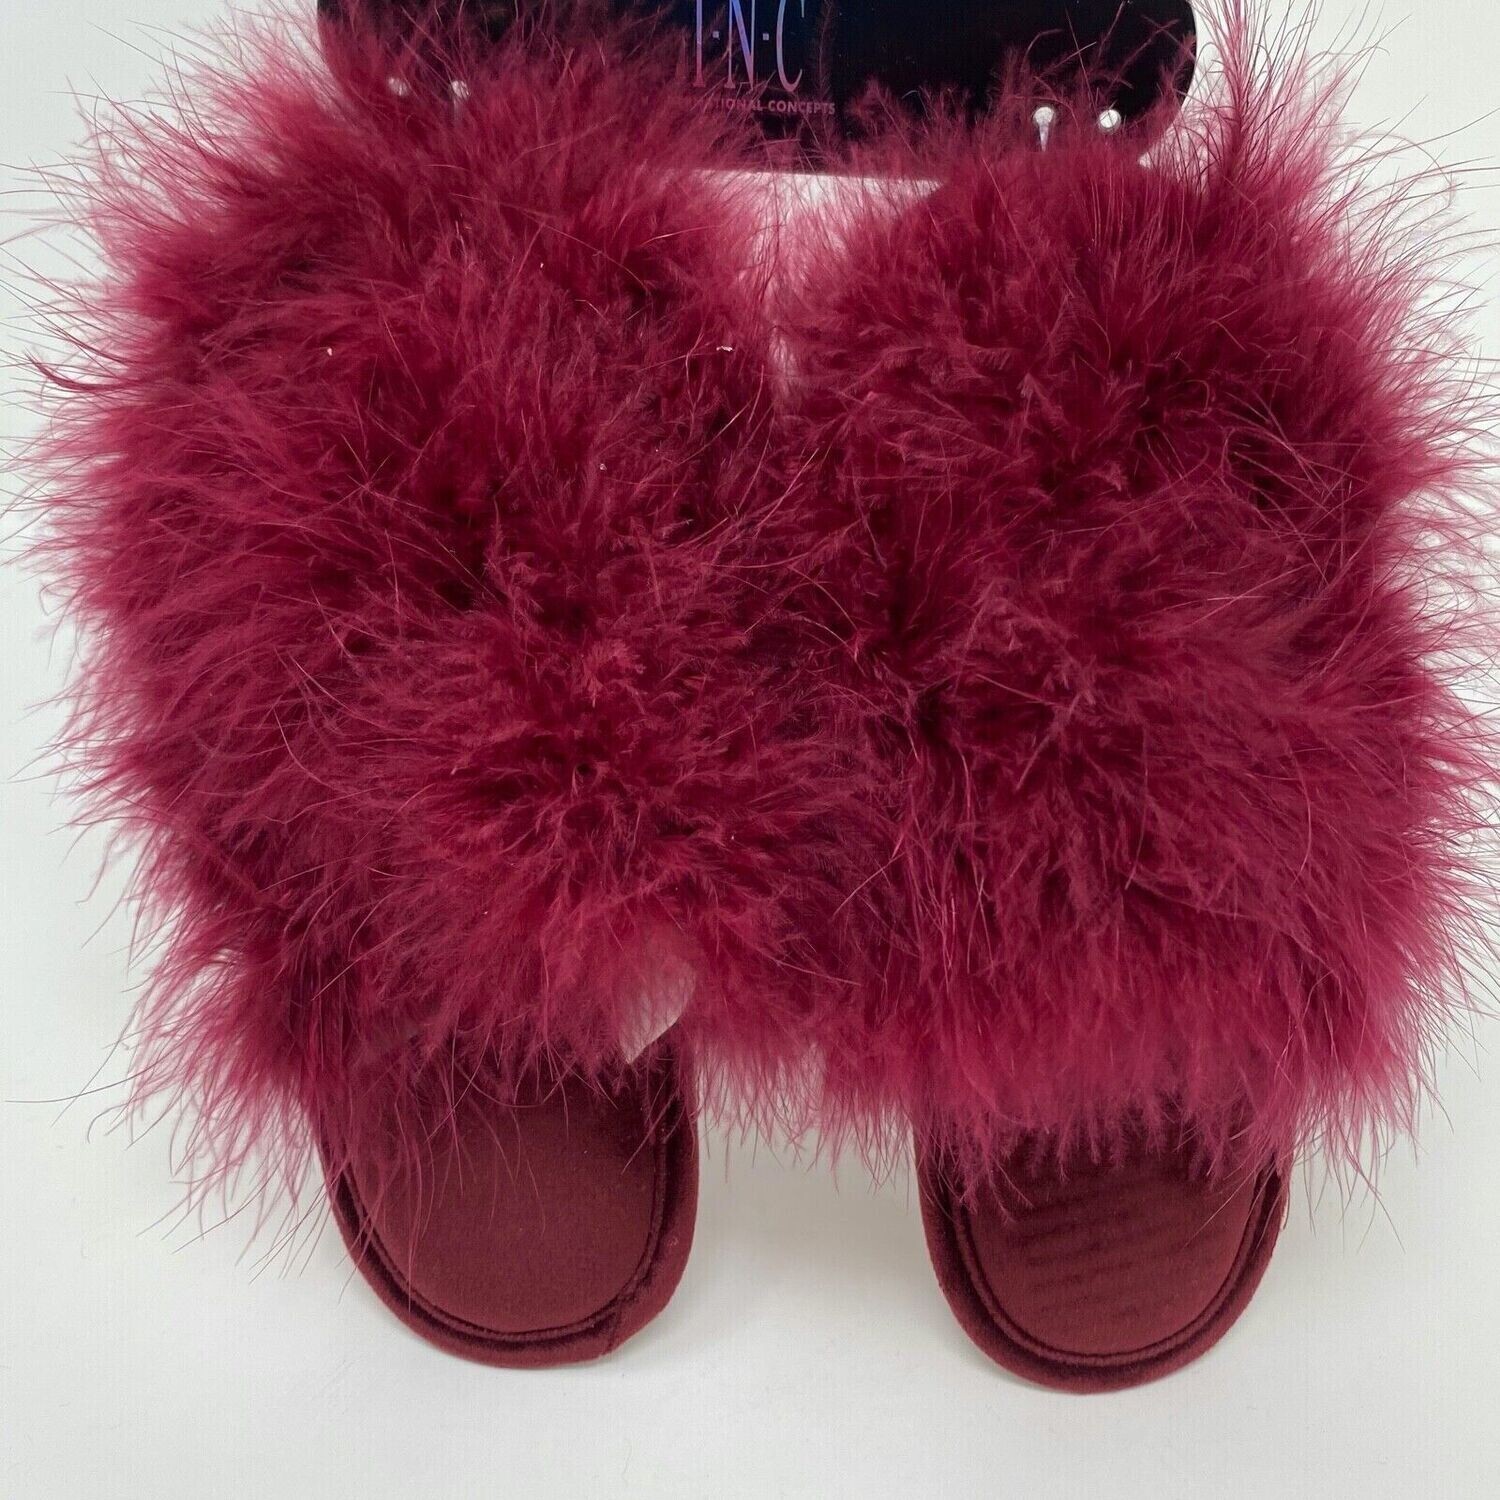 International Concepts Faux-Marabou Feathers Closed-Toe Slide Slippers - Burgundy XL (11/12)